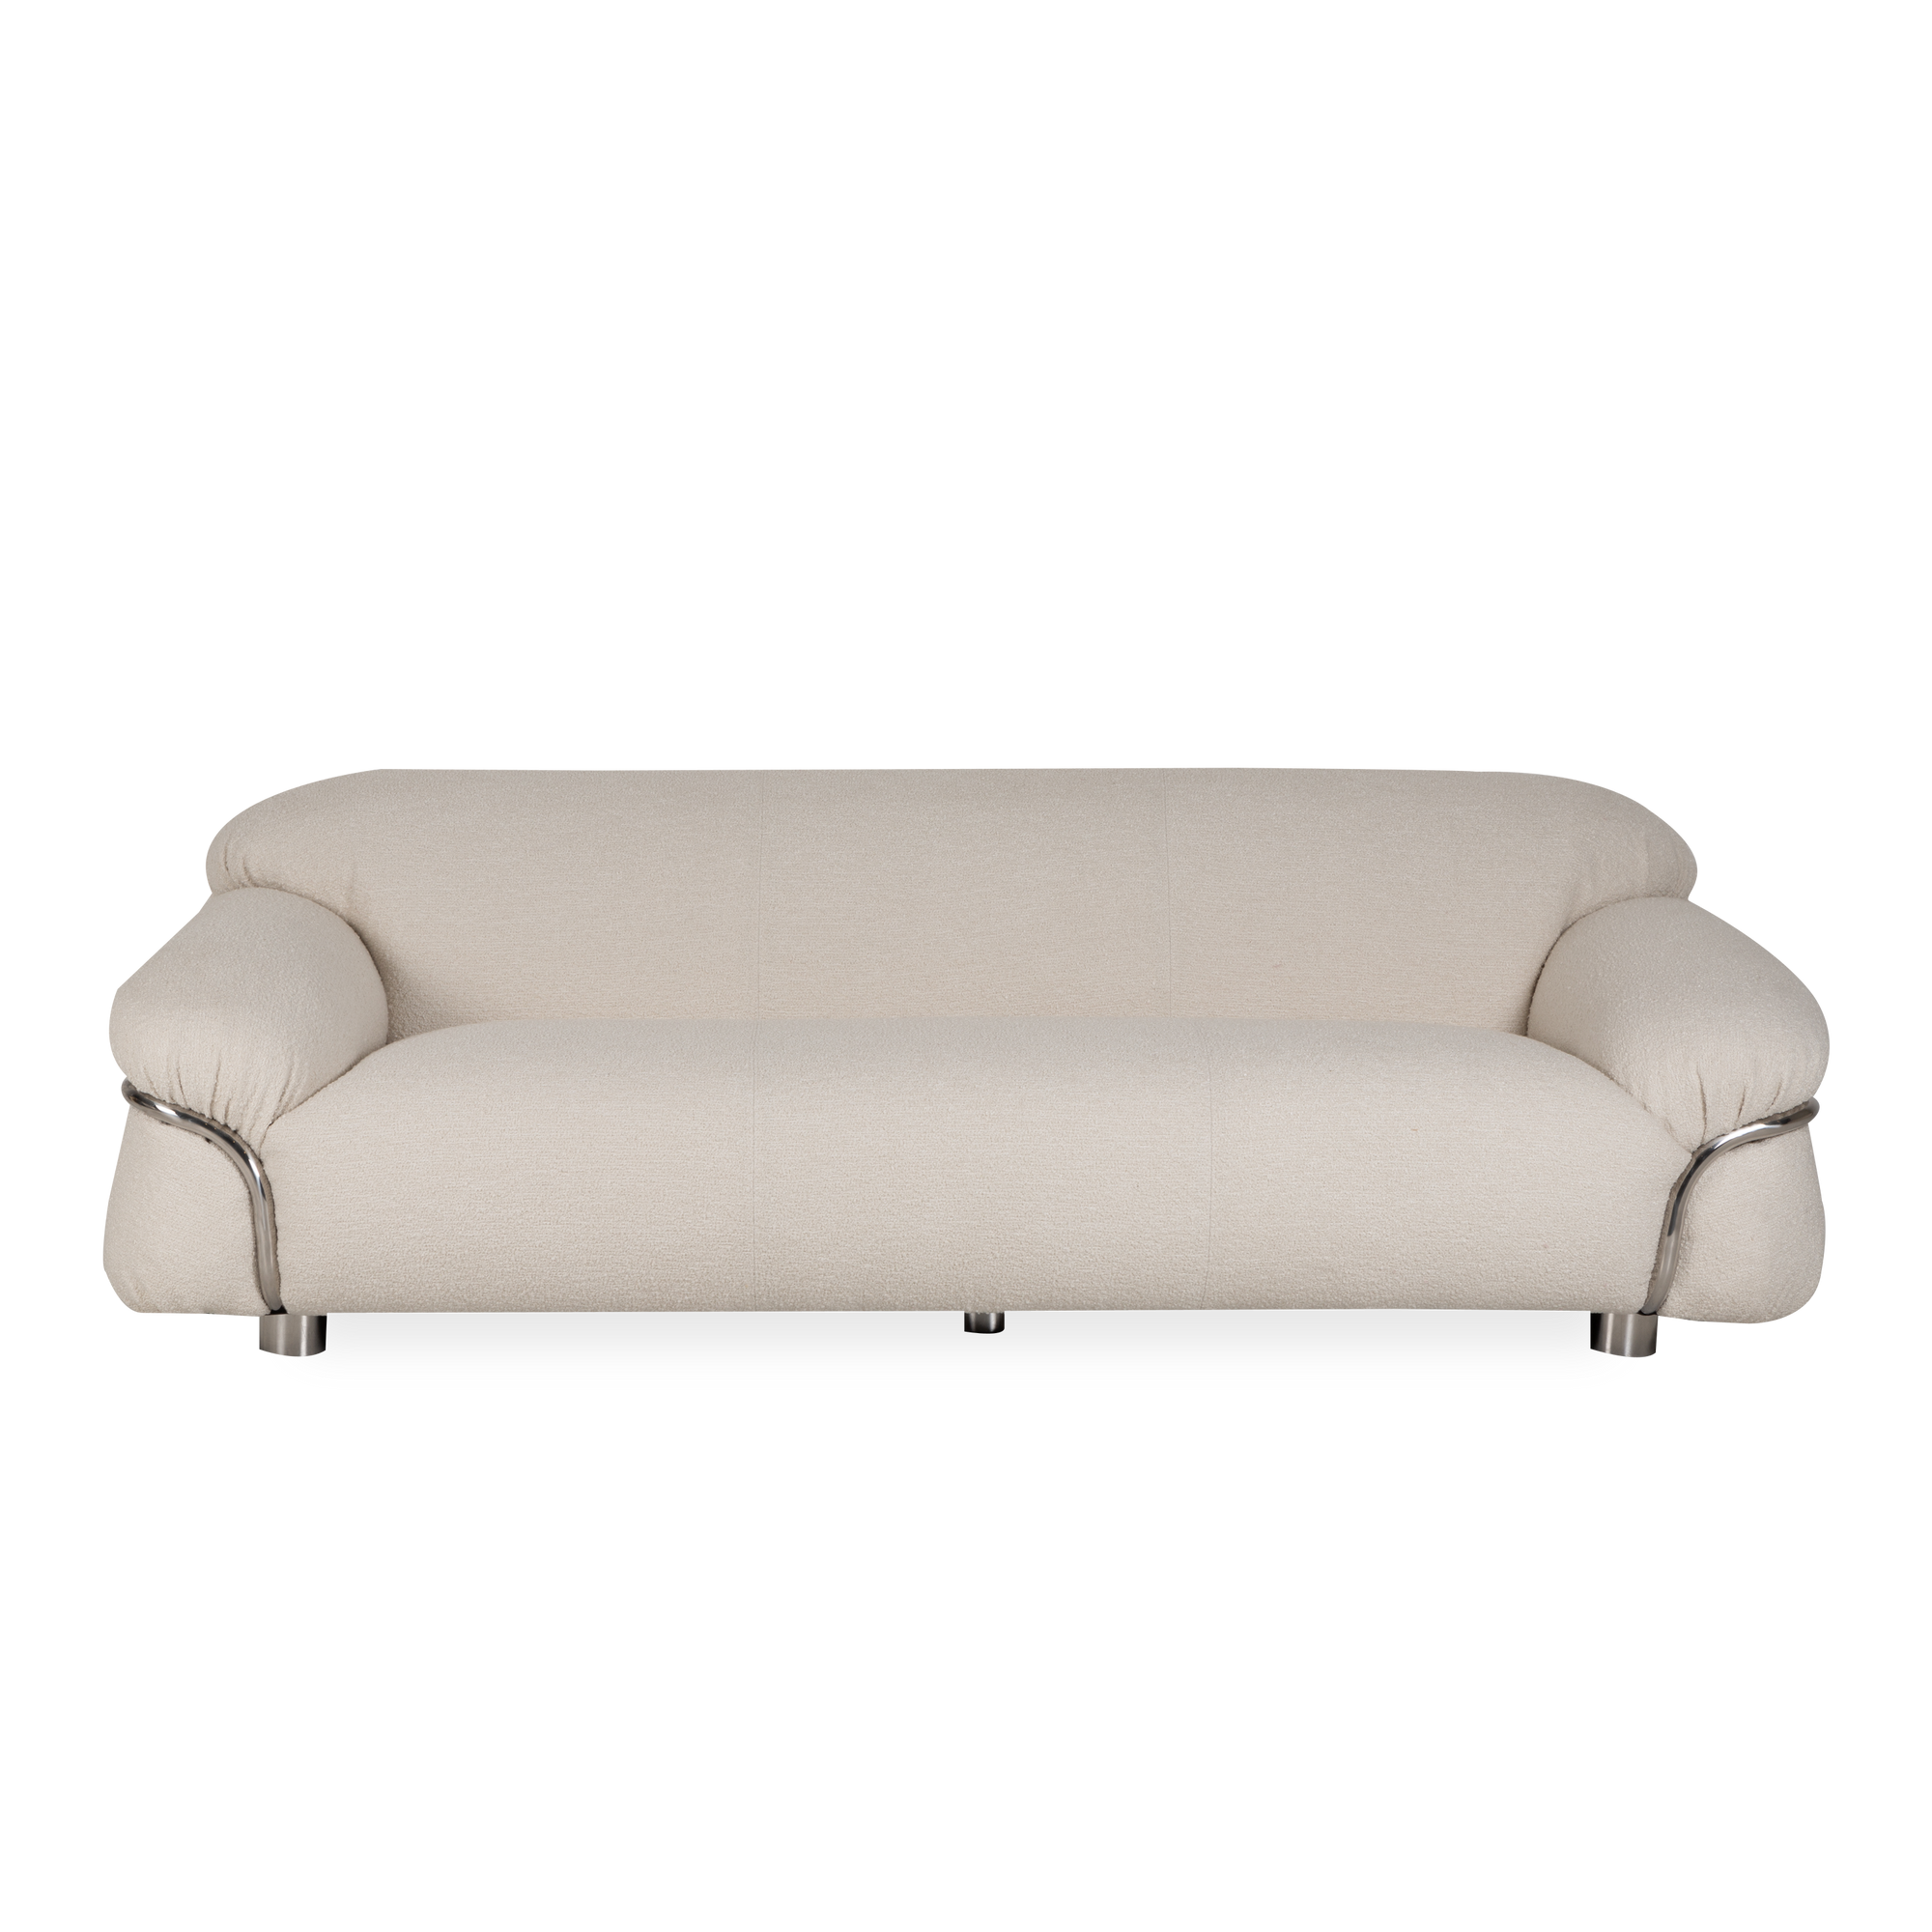 Taking cues from 70s Italian Design, the Phoenix Sofa adds a vintage touch to your space that still feel modern.